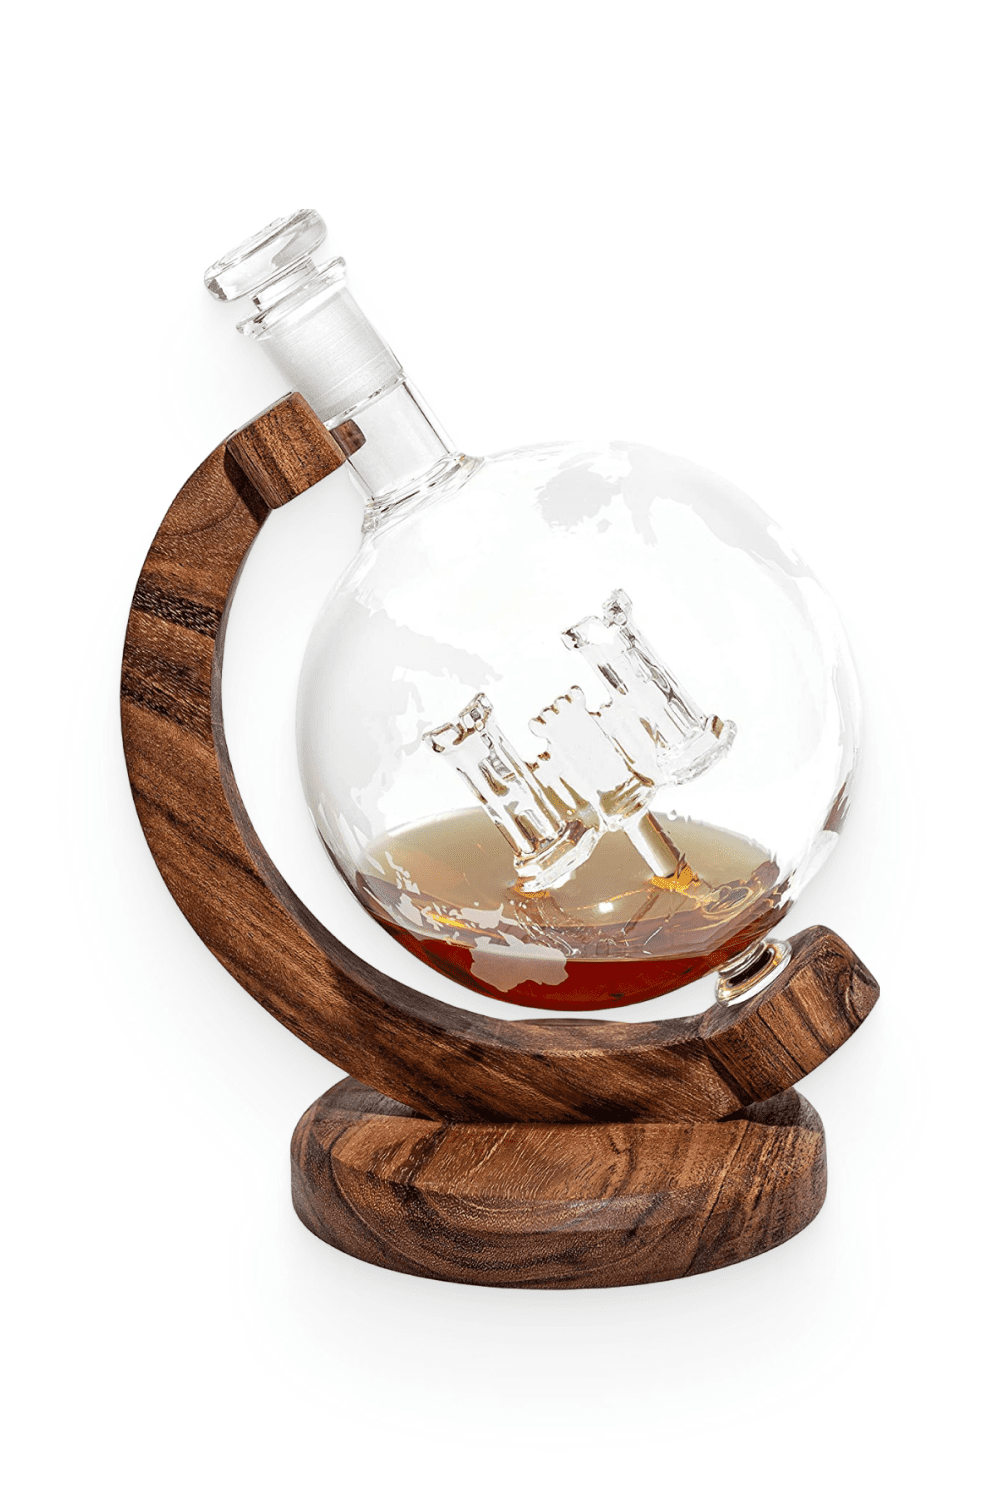 Army Corps of Engineers Decanter.